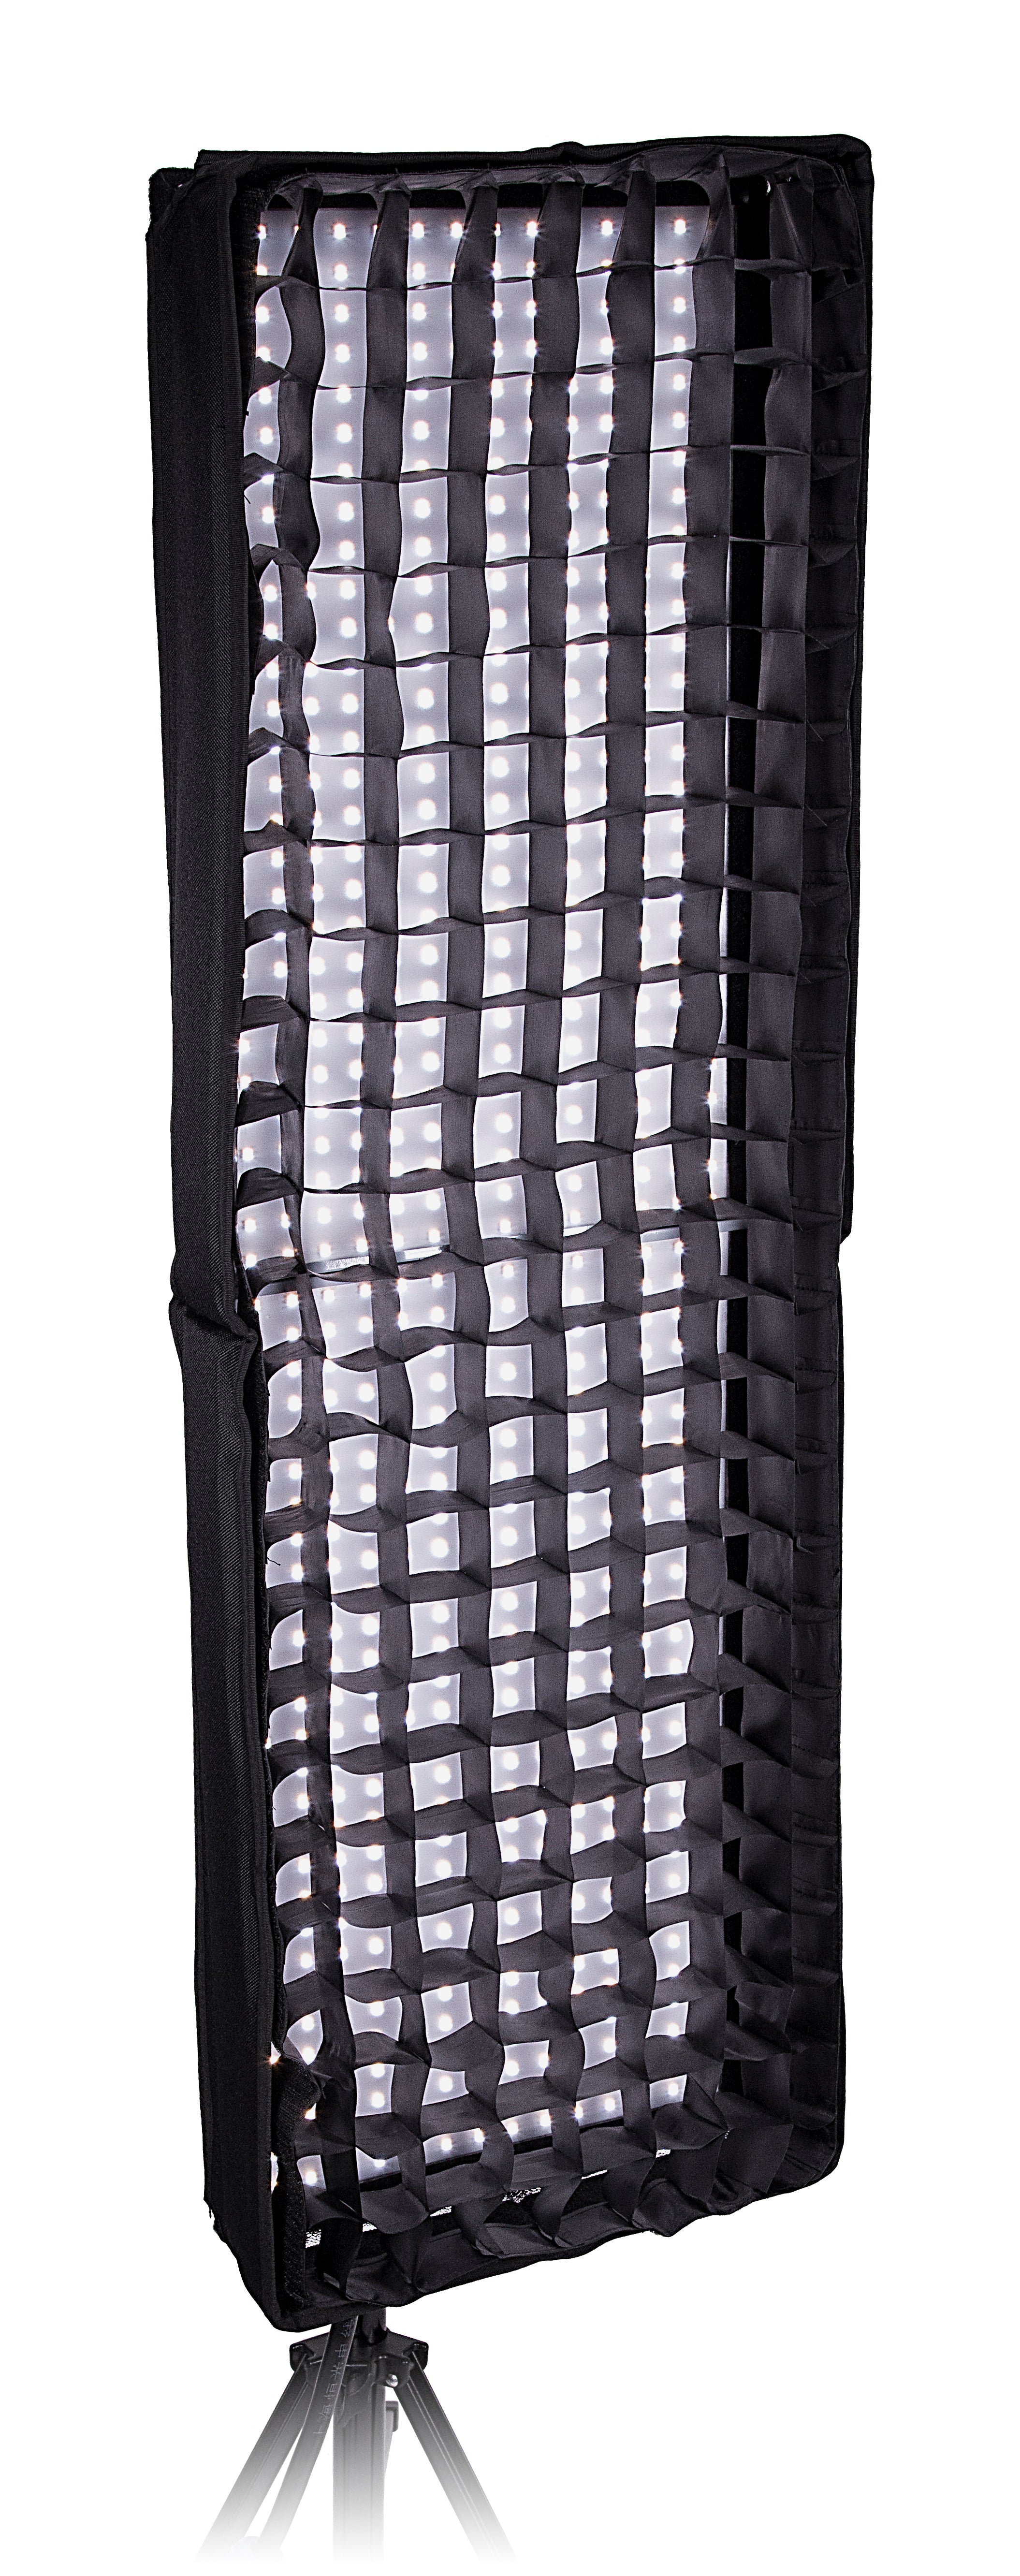 Fotodiox Pro Eggcrate Grid for SkyFiller Wings 1x4 Lights - Fits SkyFiller Wings LED Lighting SFW-150LS/RGB - 1x4 Bi-Color & RGB+T Folding LED Panels - 50 Degree Grid (2x2x1.5" Openings)